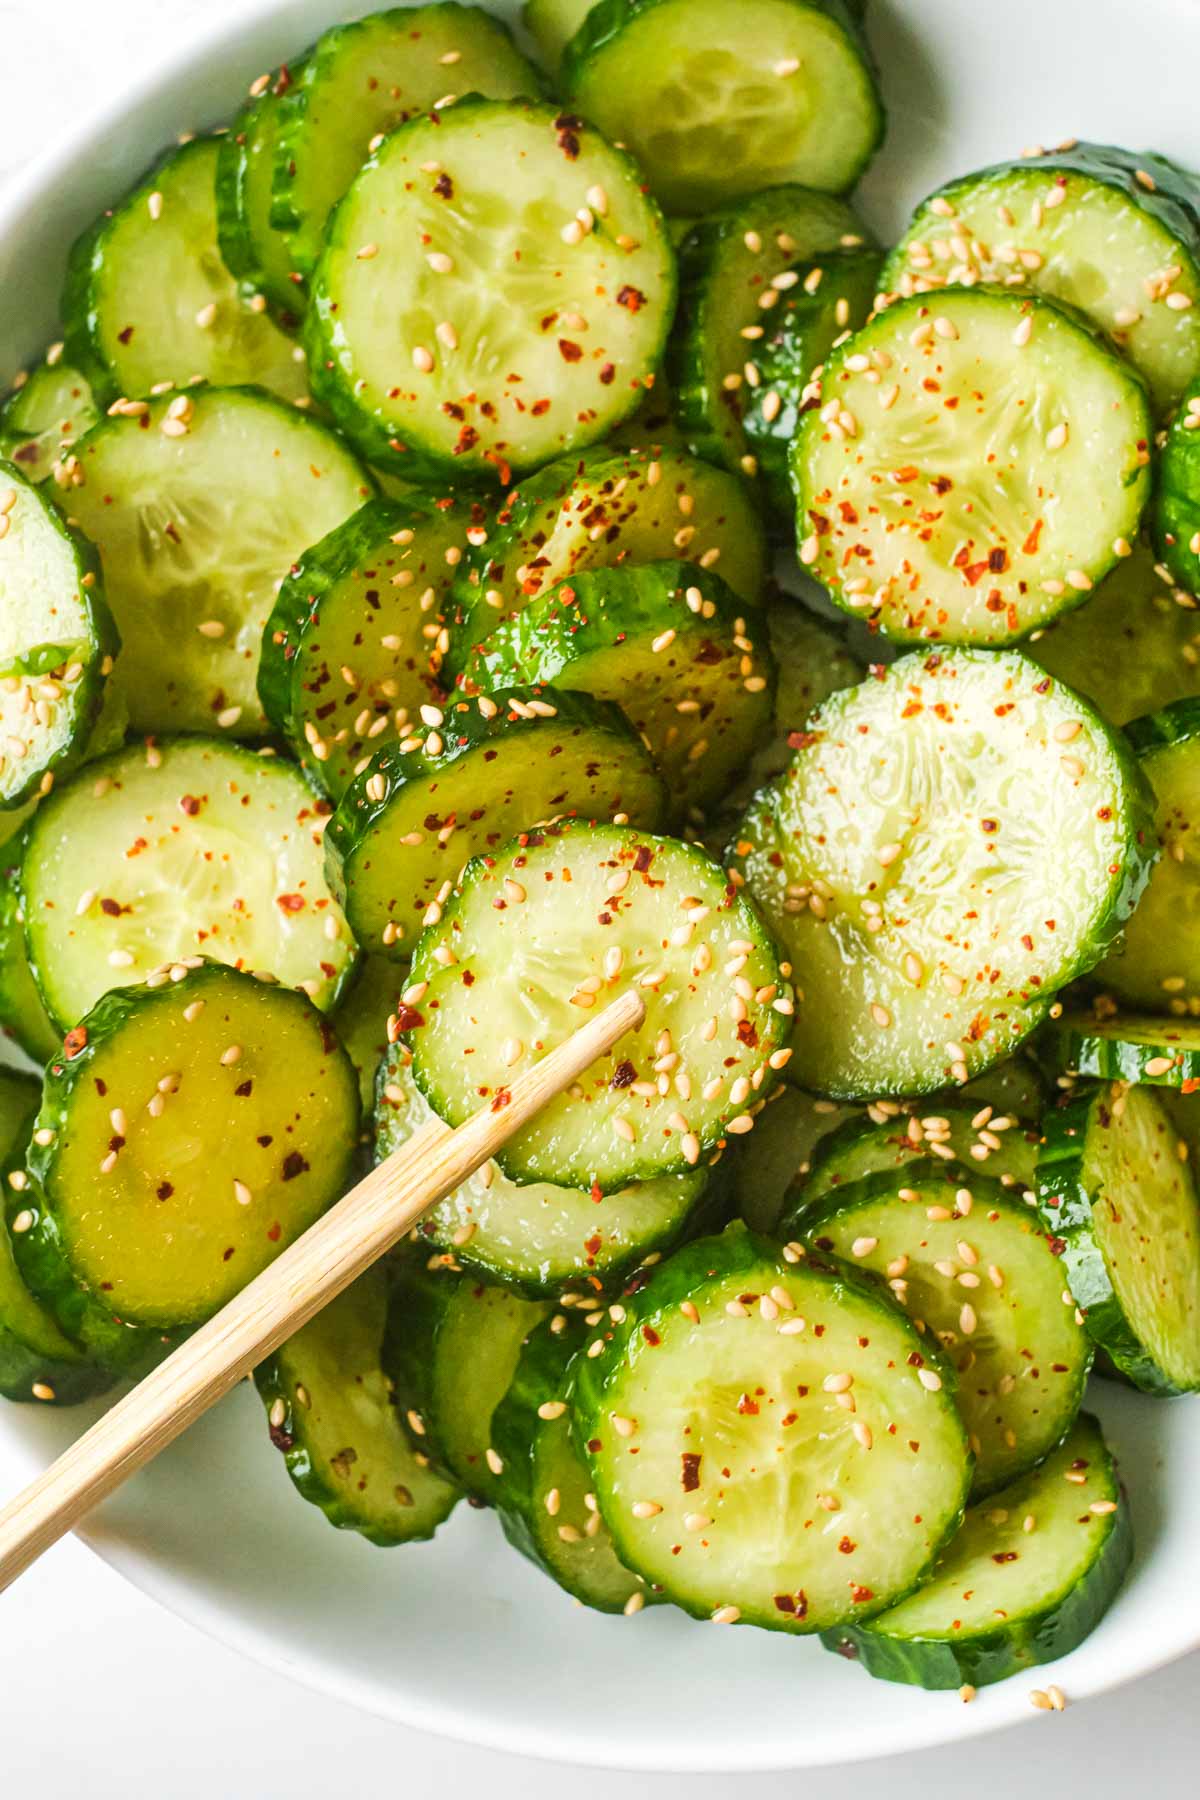 top down view of the completed asian cucumber salad with chopsticks removing one slice of cucumber